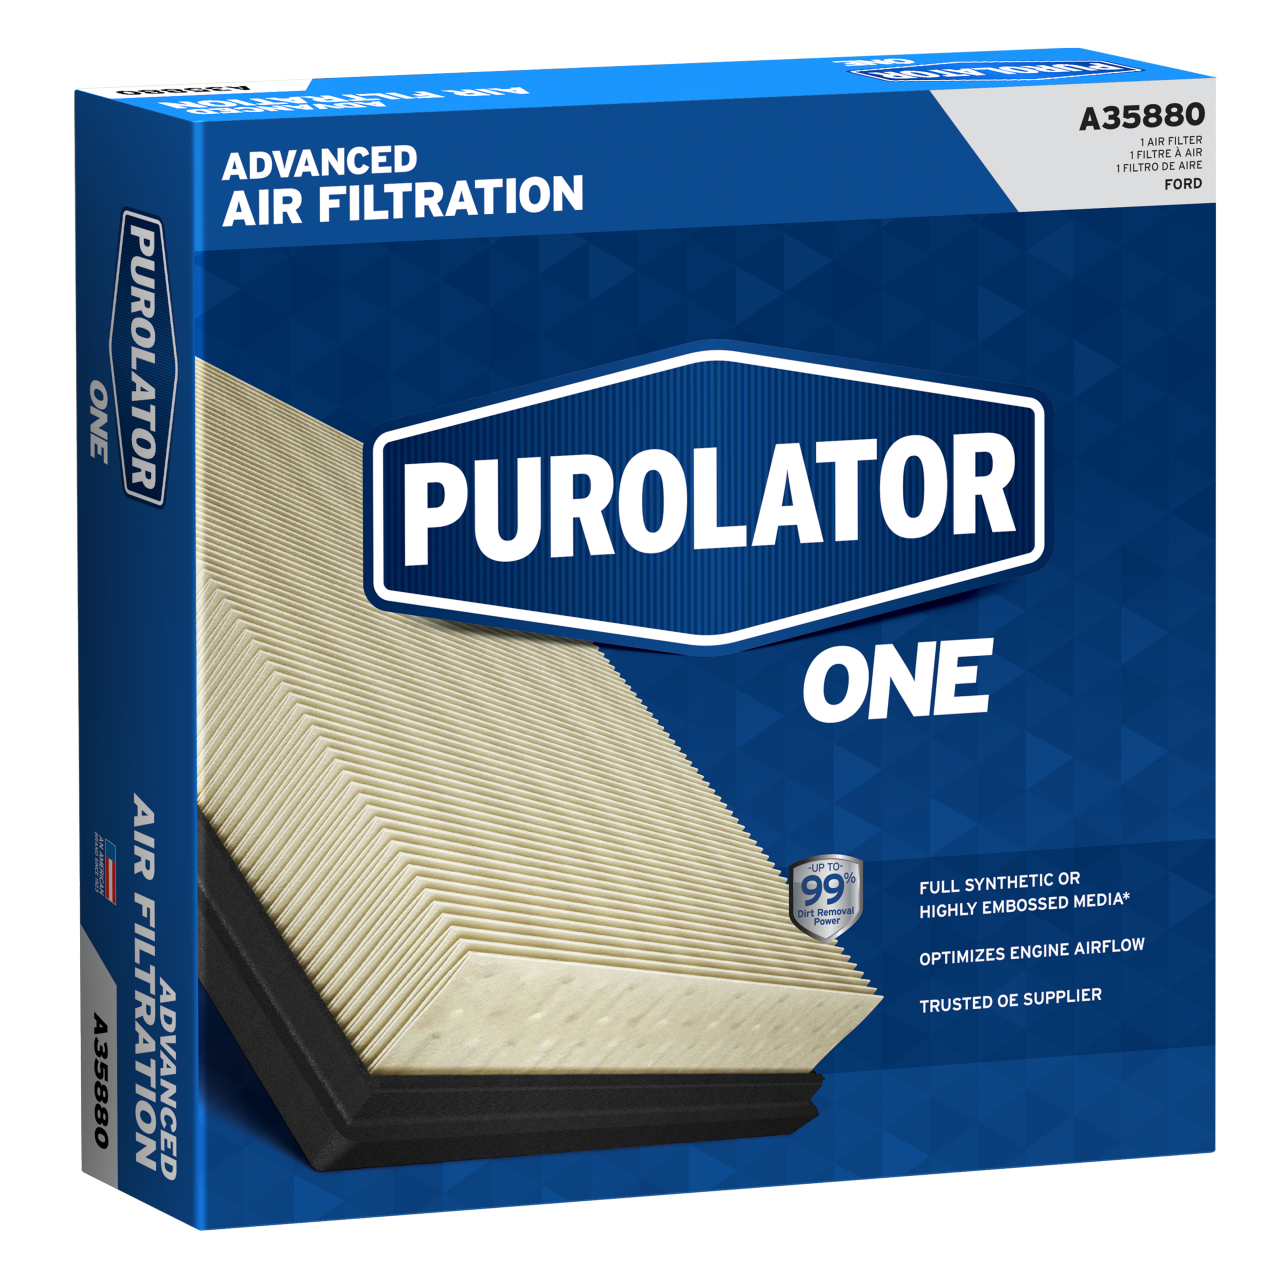 Protect your vehicle by replacing your air filter with a PurolatorONE™ Air Filter for advanced air filtration.